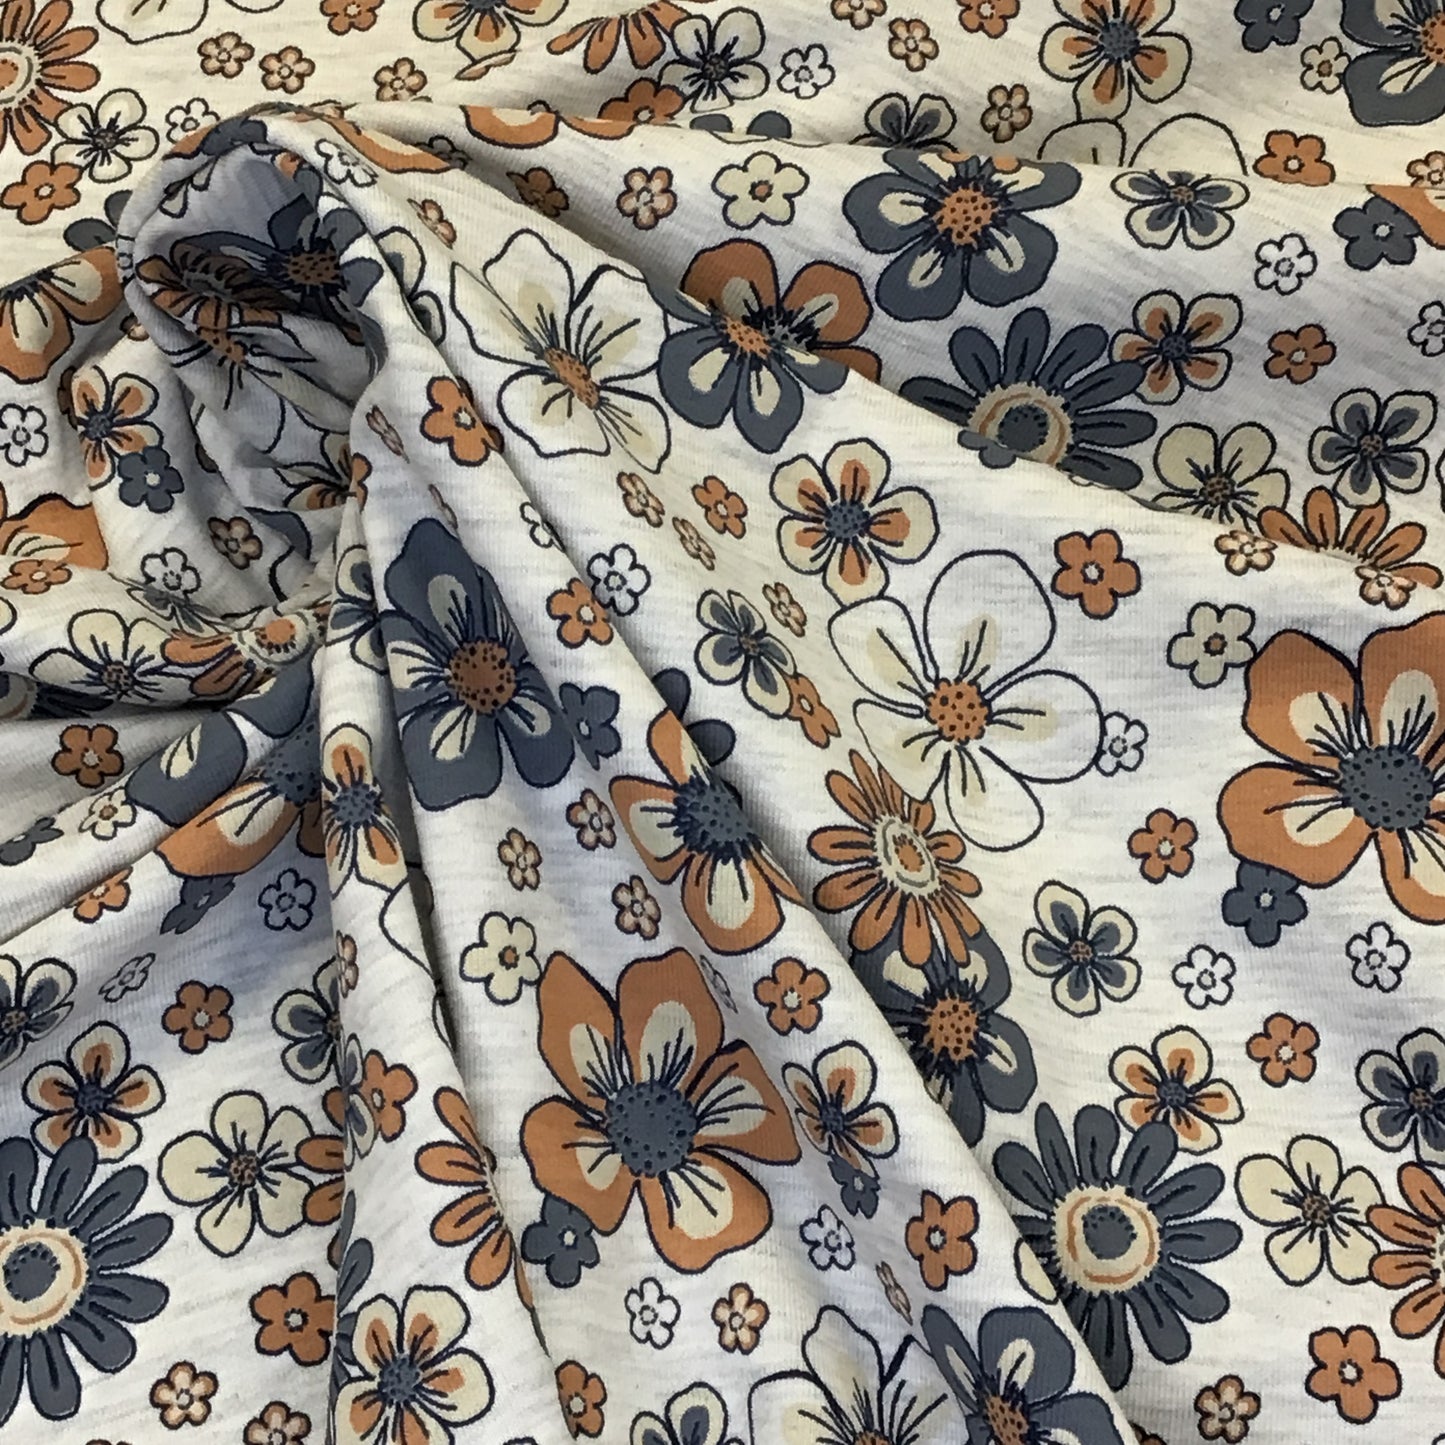 Cotton/Poly Jersey Fabric - Retro Daisies